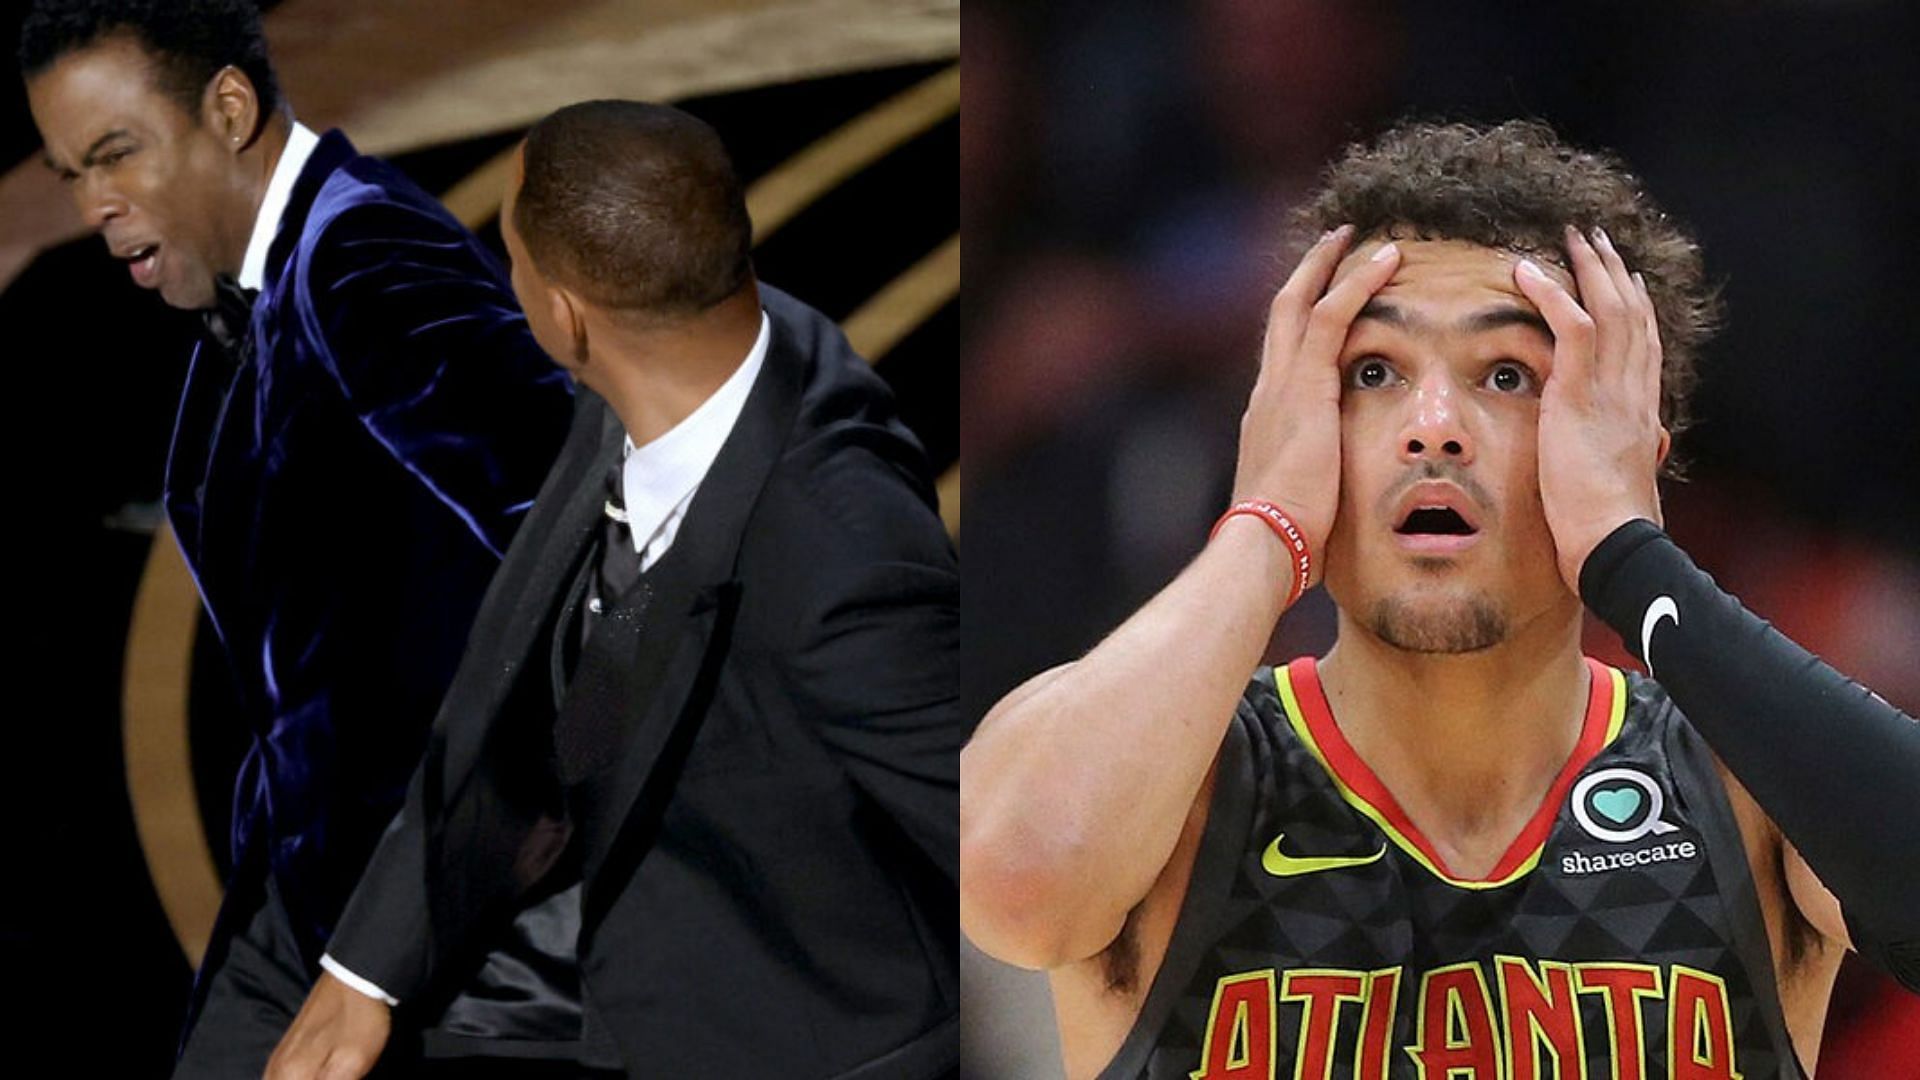 NBA World reacts to Chris Rock being slapped by Will Smith